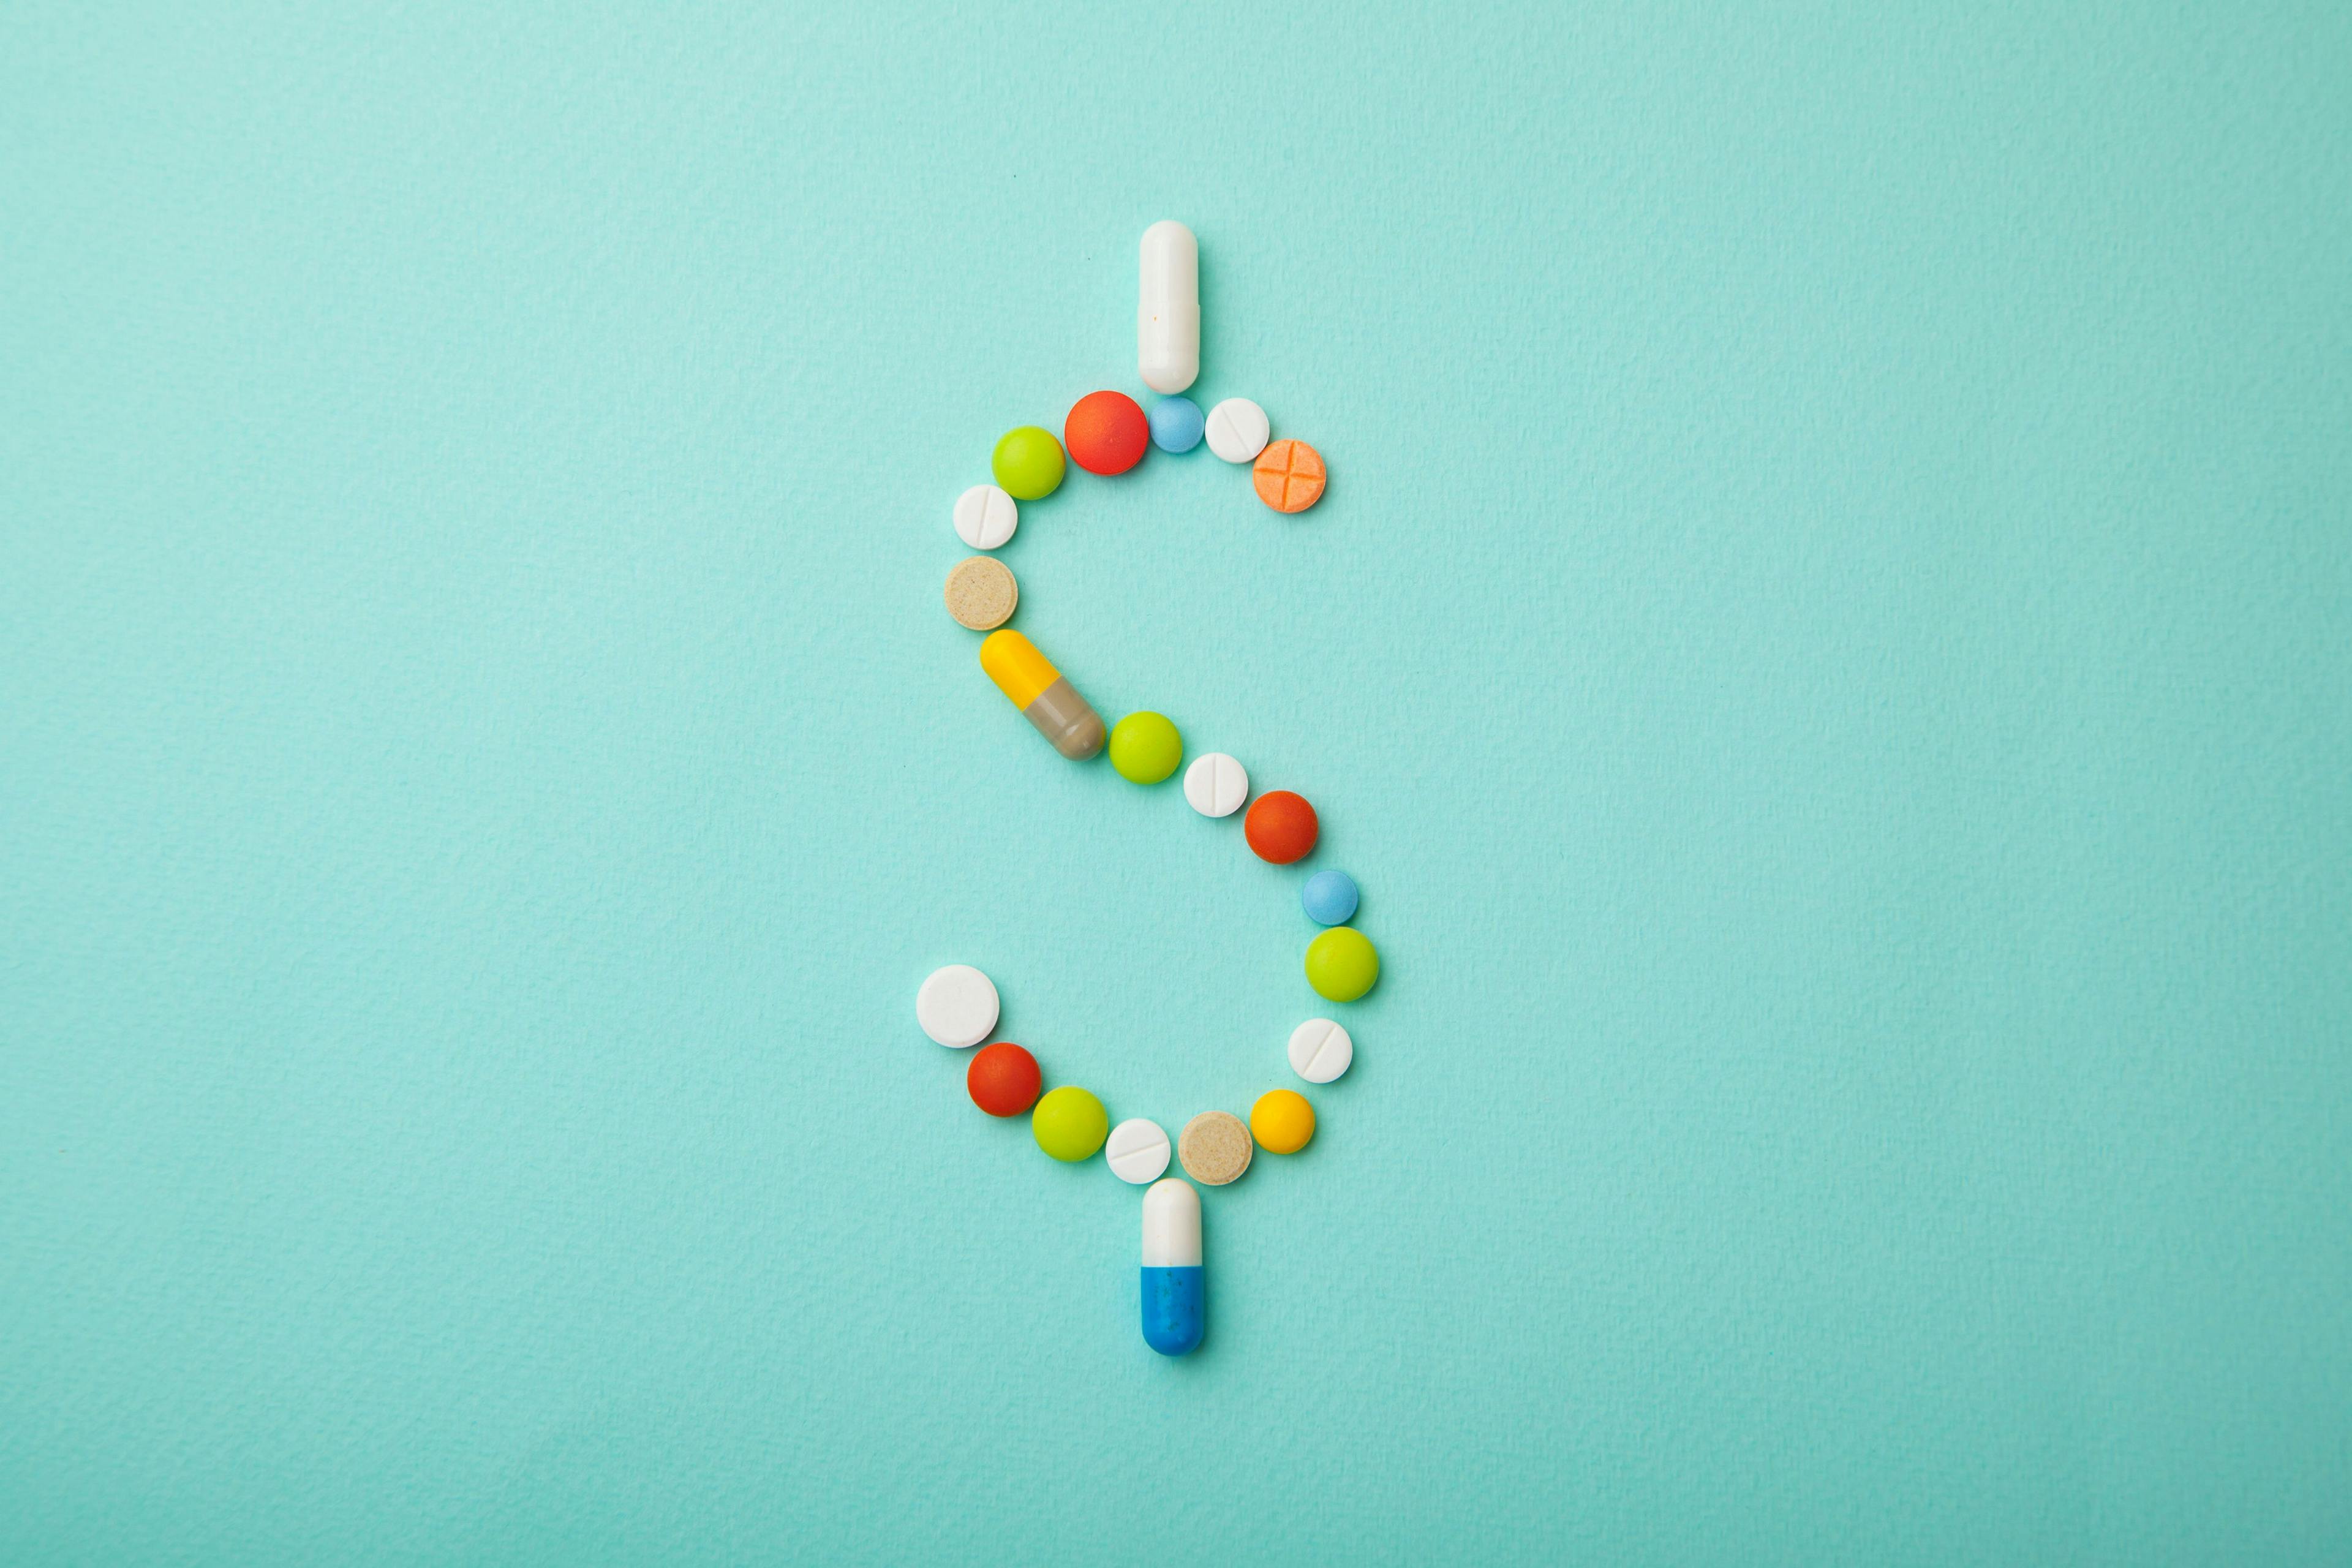 Image credit: adragan | stock.adobe.com. Symbol of money dollar from colored pills and capsules on green background. Expensive medicine and medical insurance